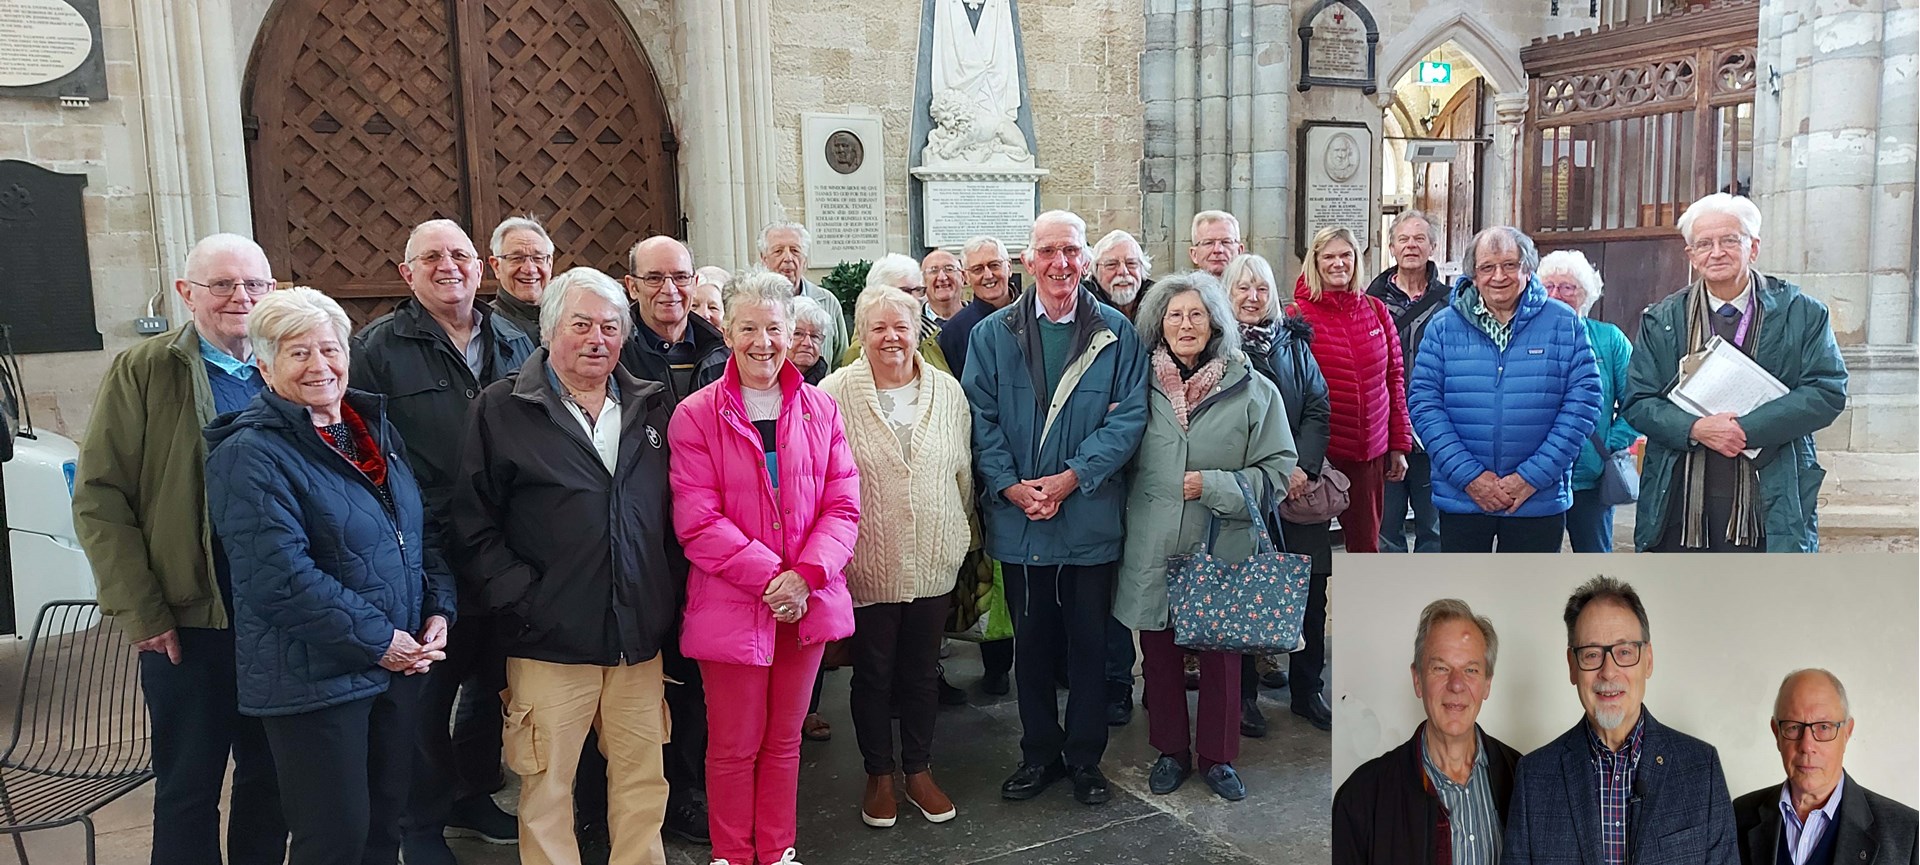 Probus Cathedral visitors and Inset - Speaker David Hinchcliffe (Tinpot & the Spy) with Terry Jackson & Bruce WattMay meeting